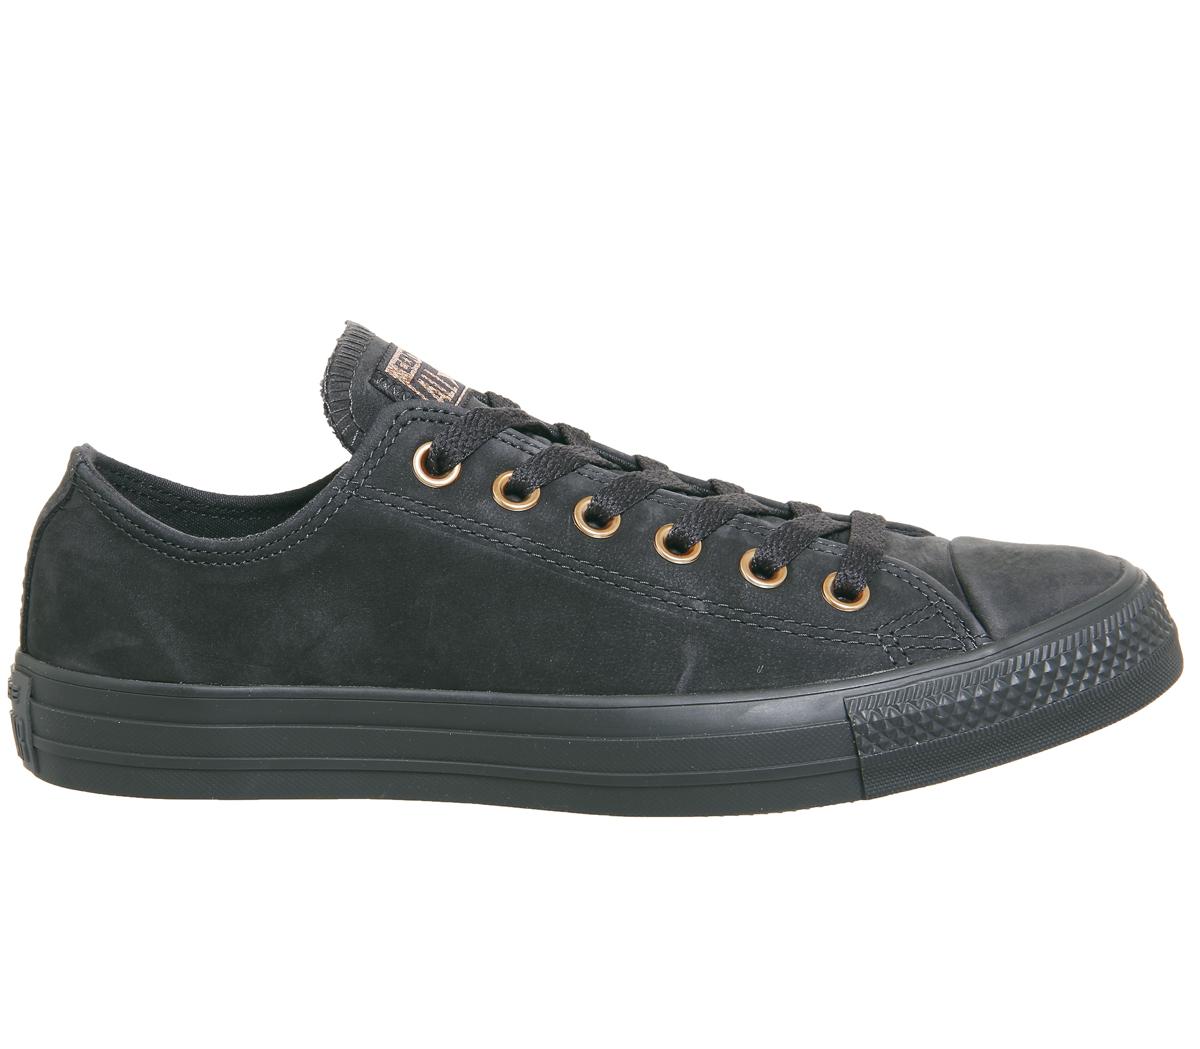 converse all star low leather almost black rose gold